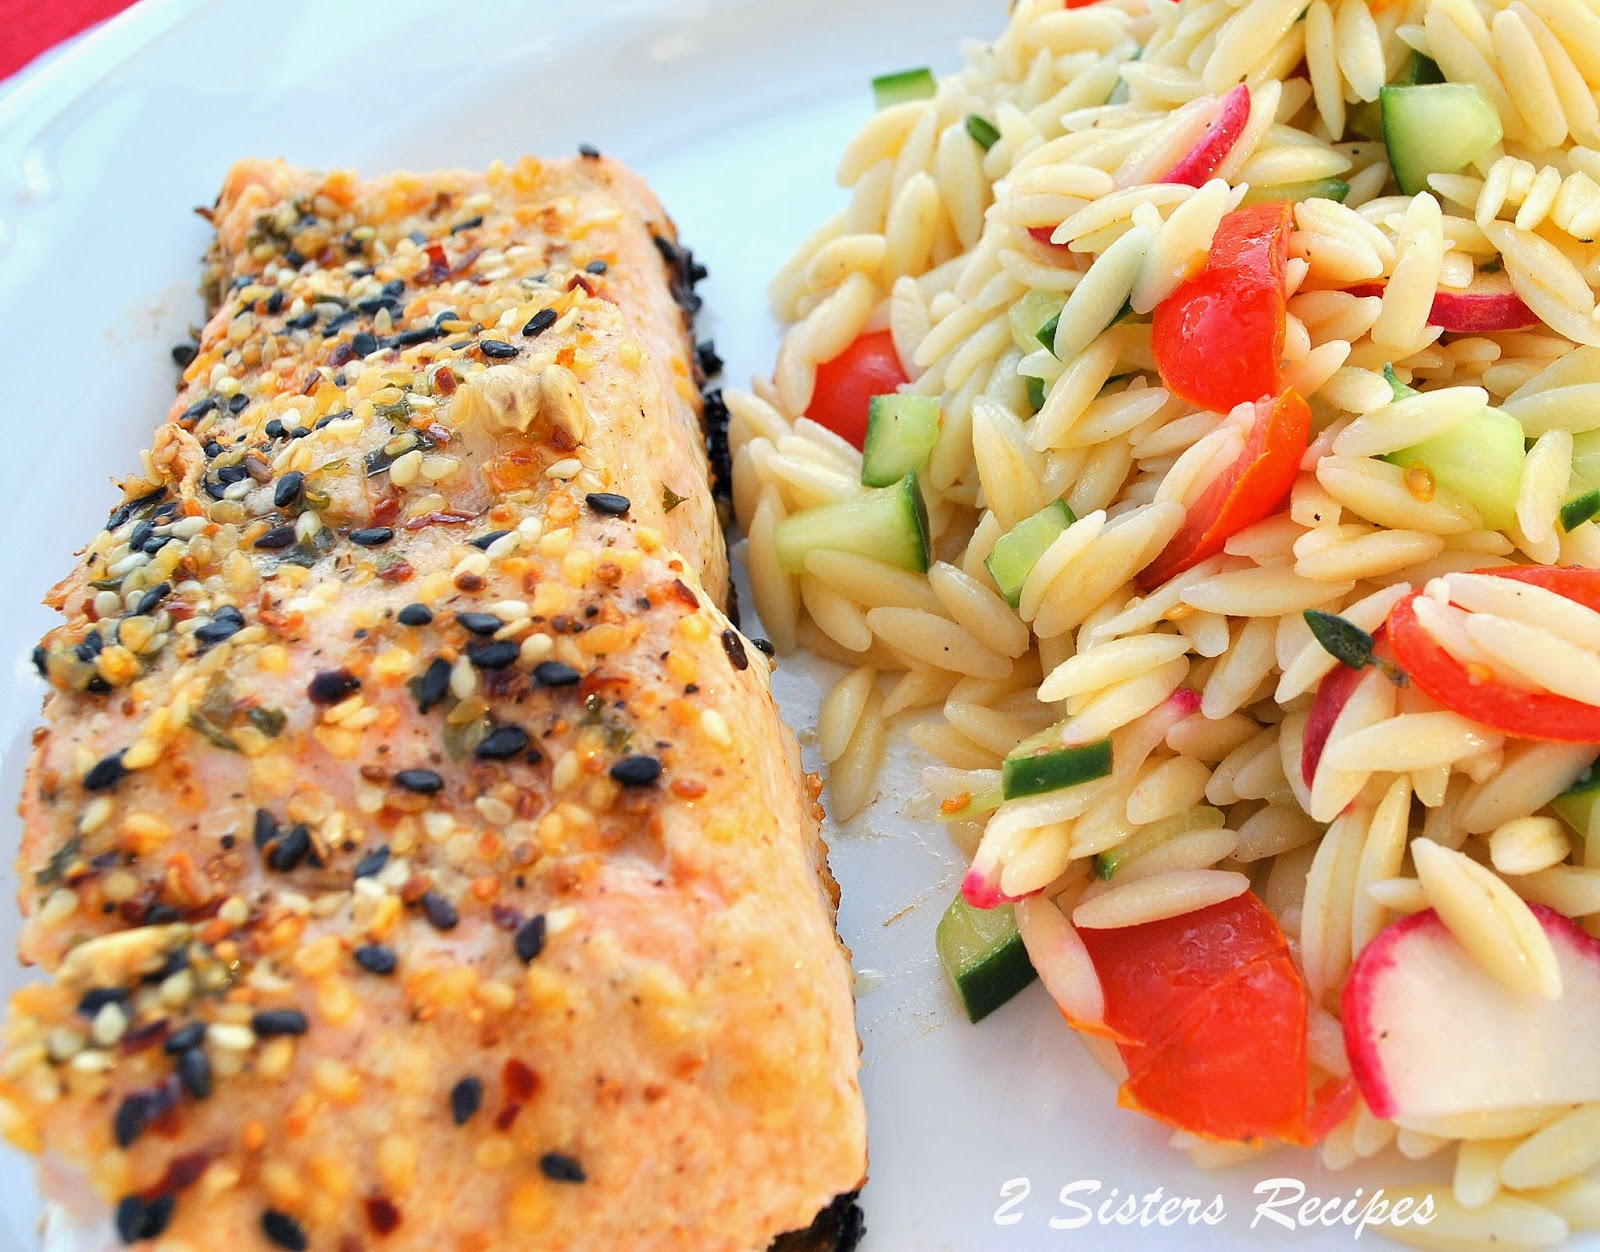 Grilled Sesame Ginger Salmon by 2sistersrecipes.com